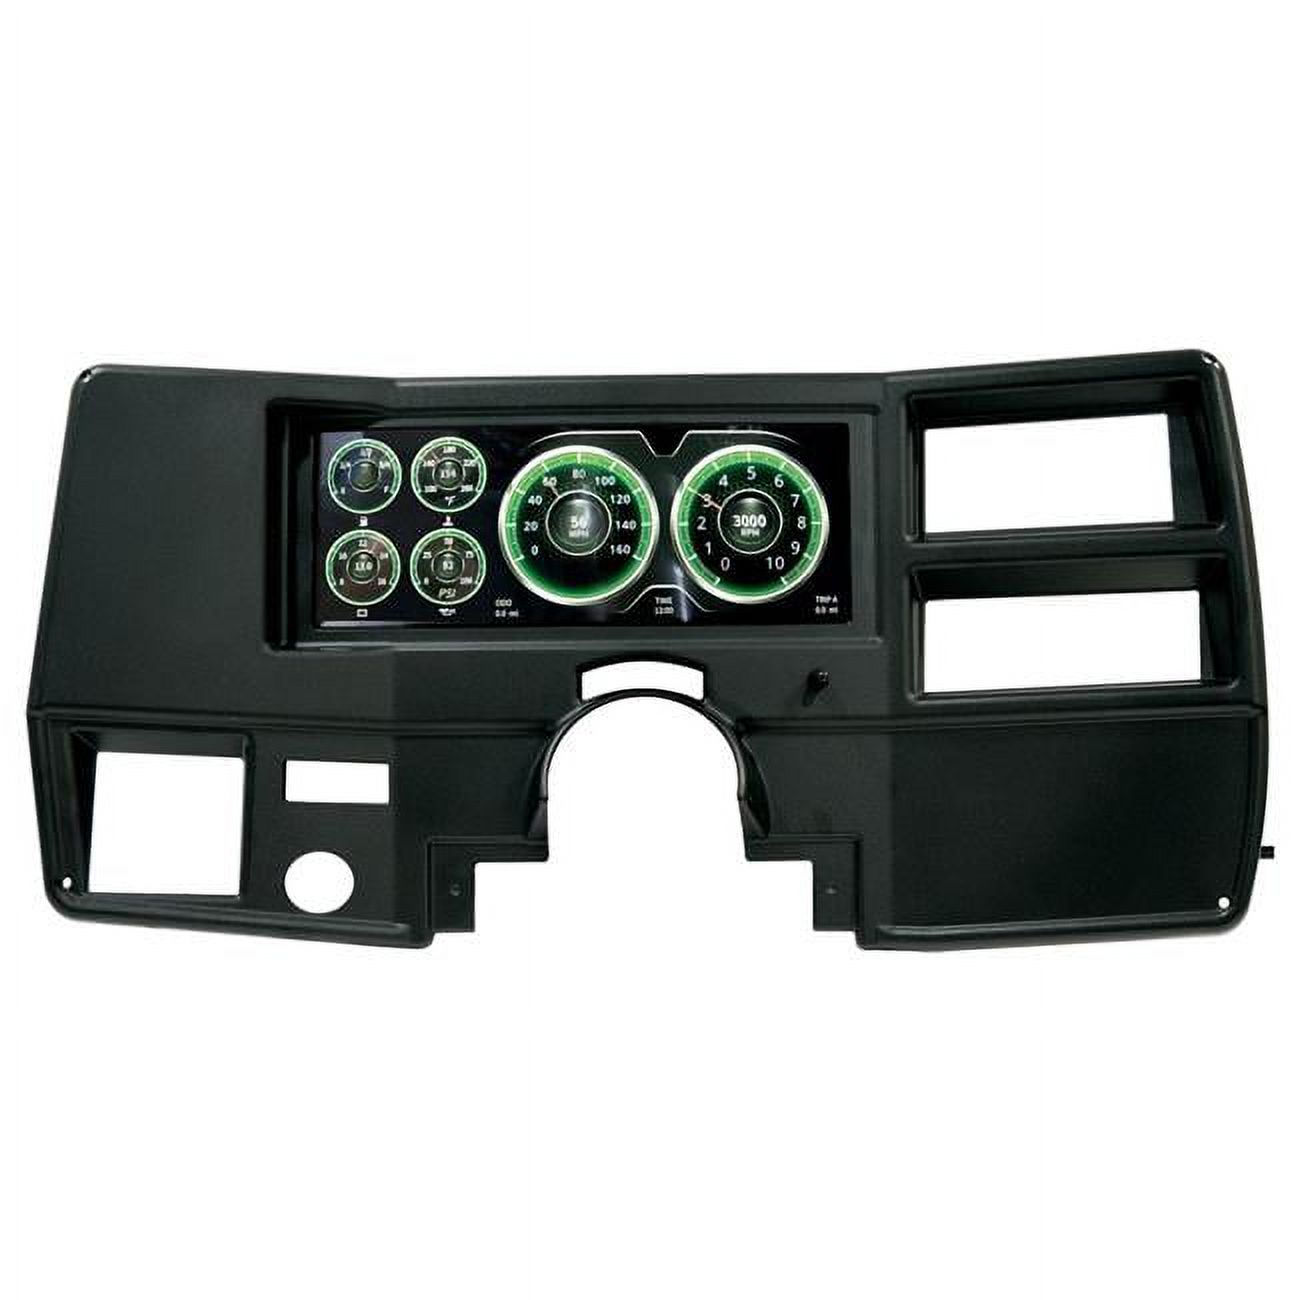 12.3 in. LCD Screen Invision HD Digital Dash with Harness & Sensors for 1973-1987 GM Fullsize Truck - image 1 of 1